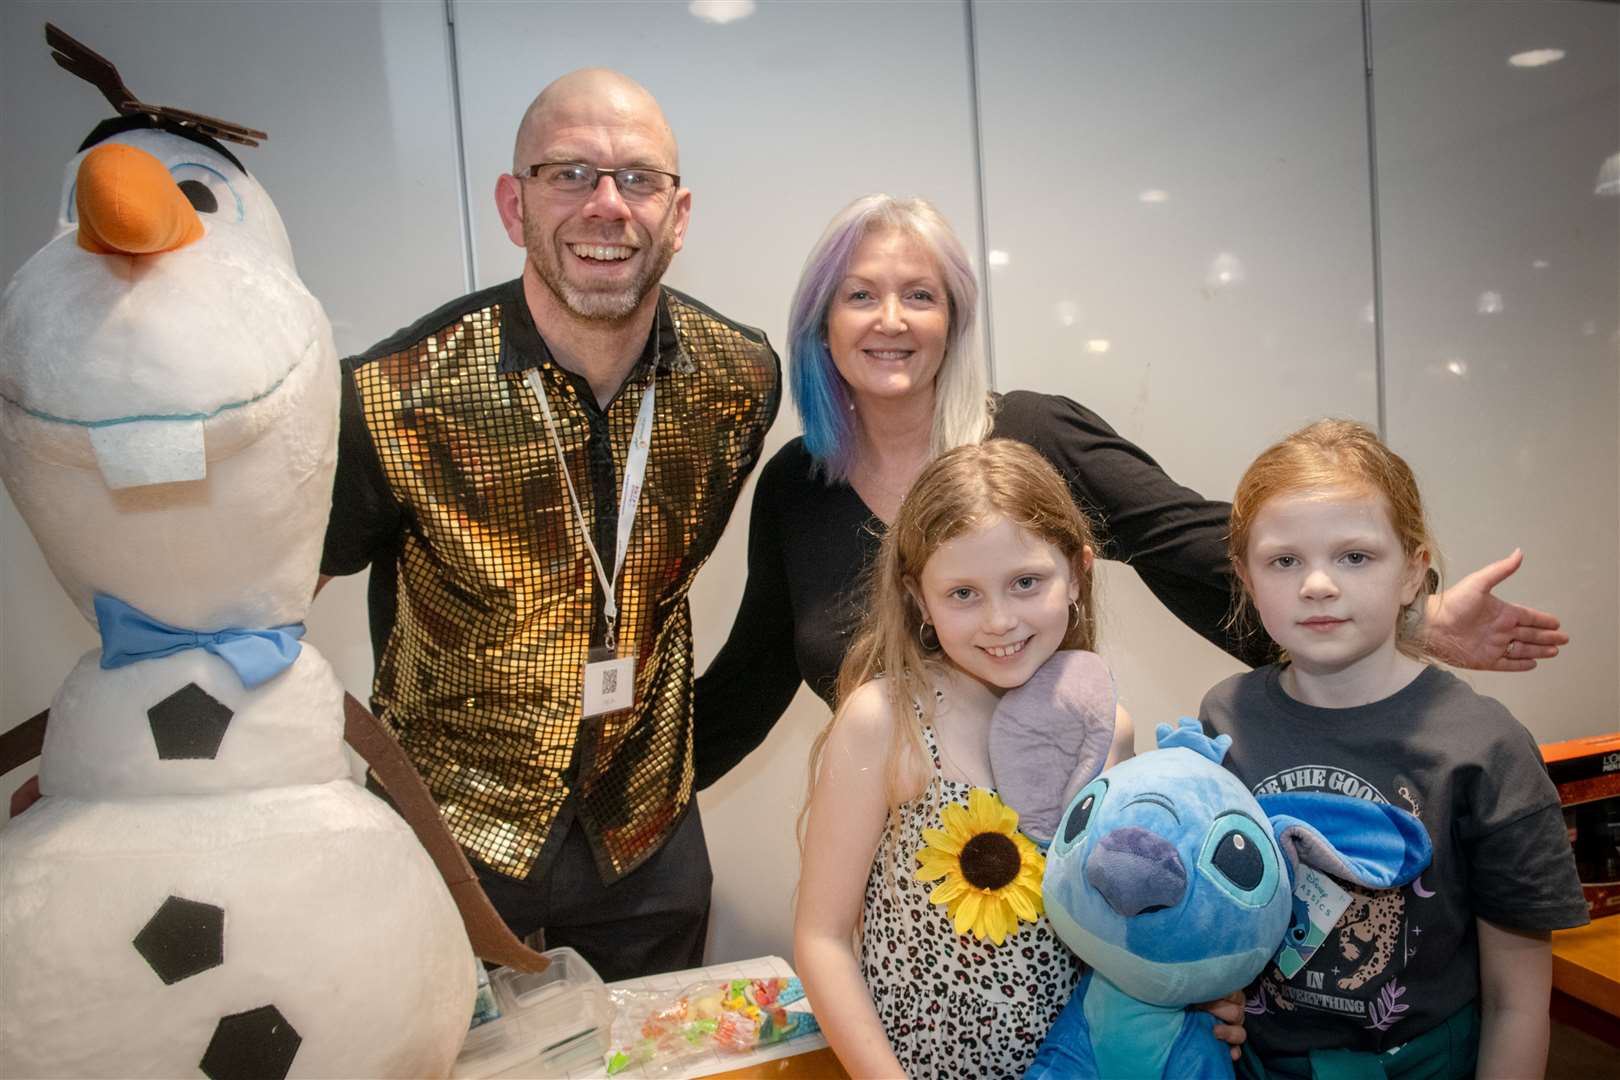 Andy Dixon and Ruth Mason along with helpers Iona and Emily at our quiz night (plus the huge Olaf and Stitch prizes).